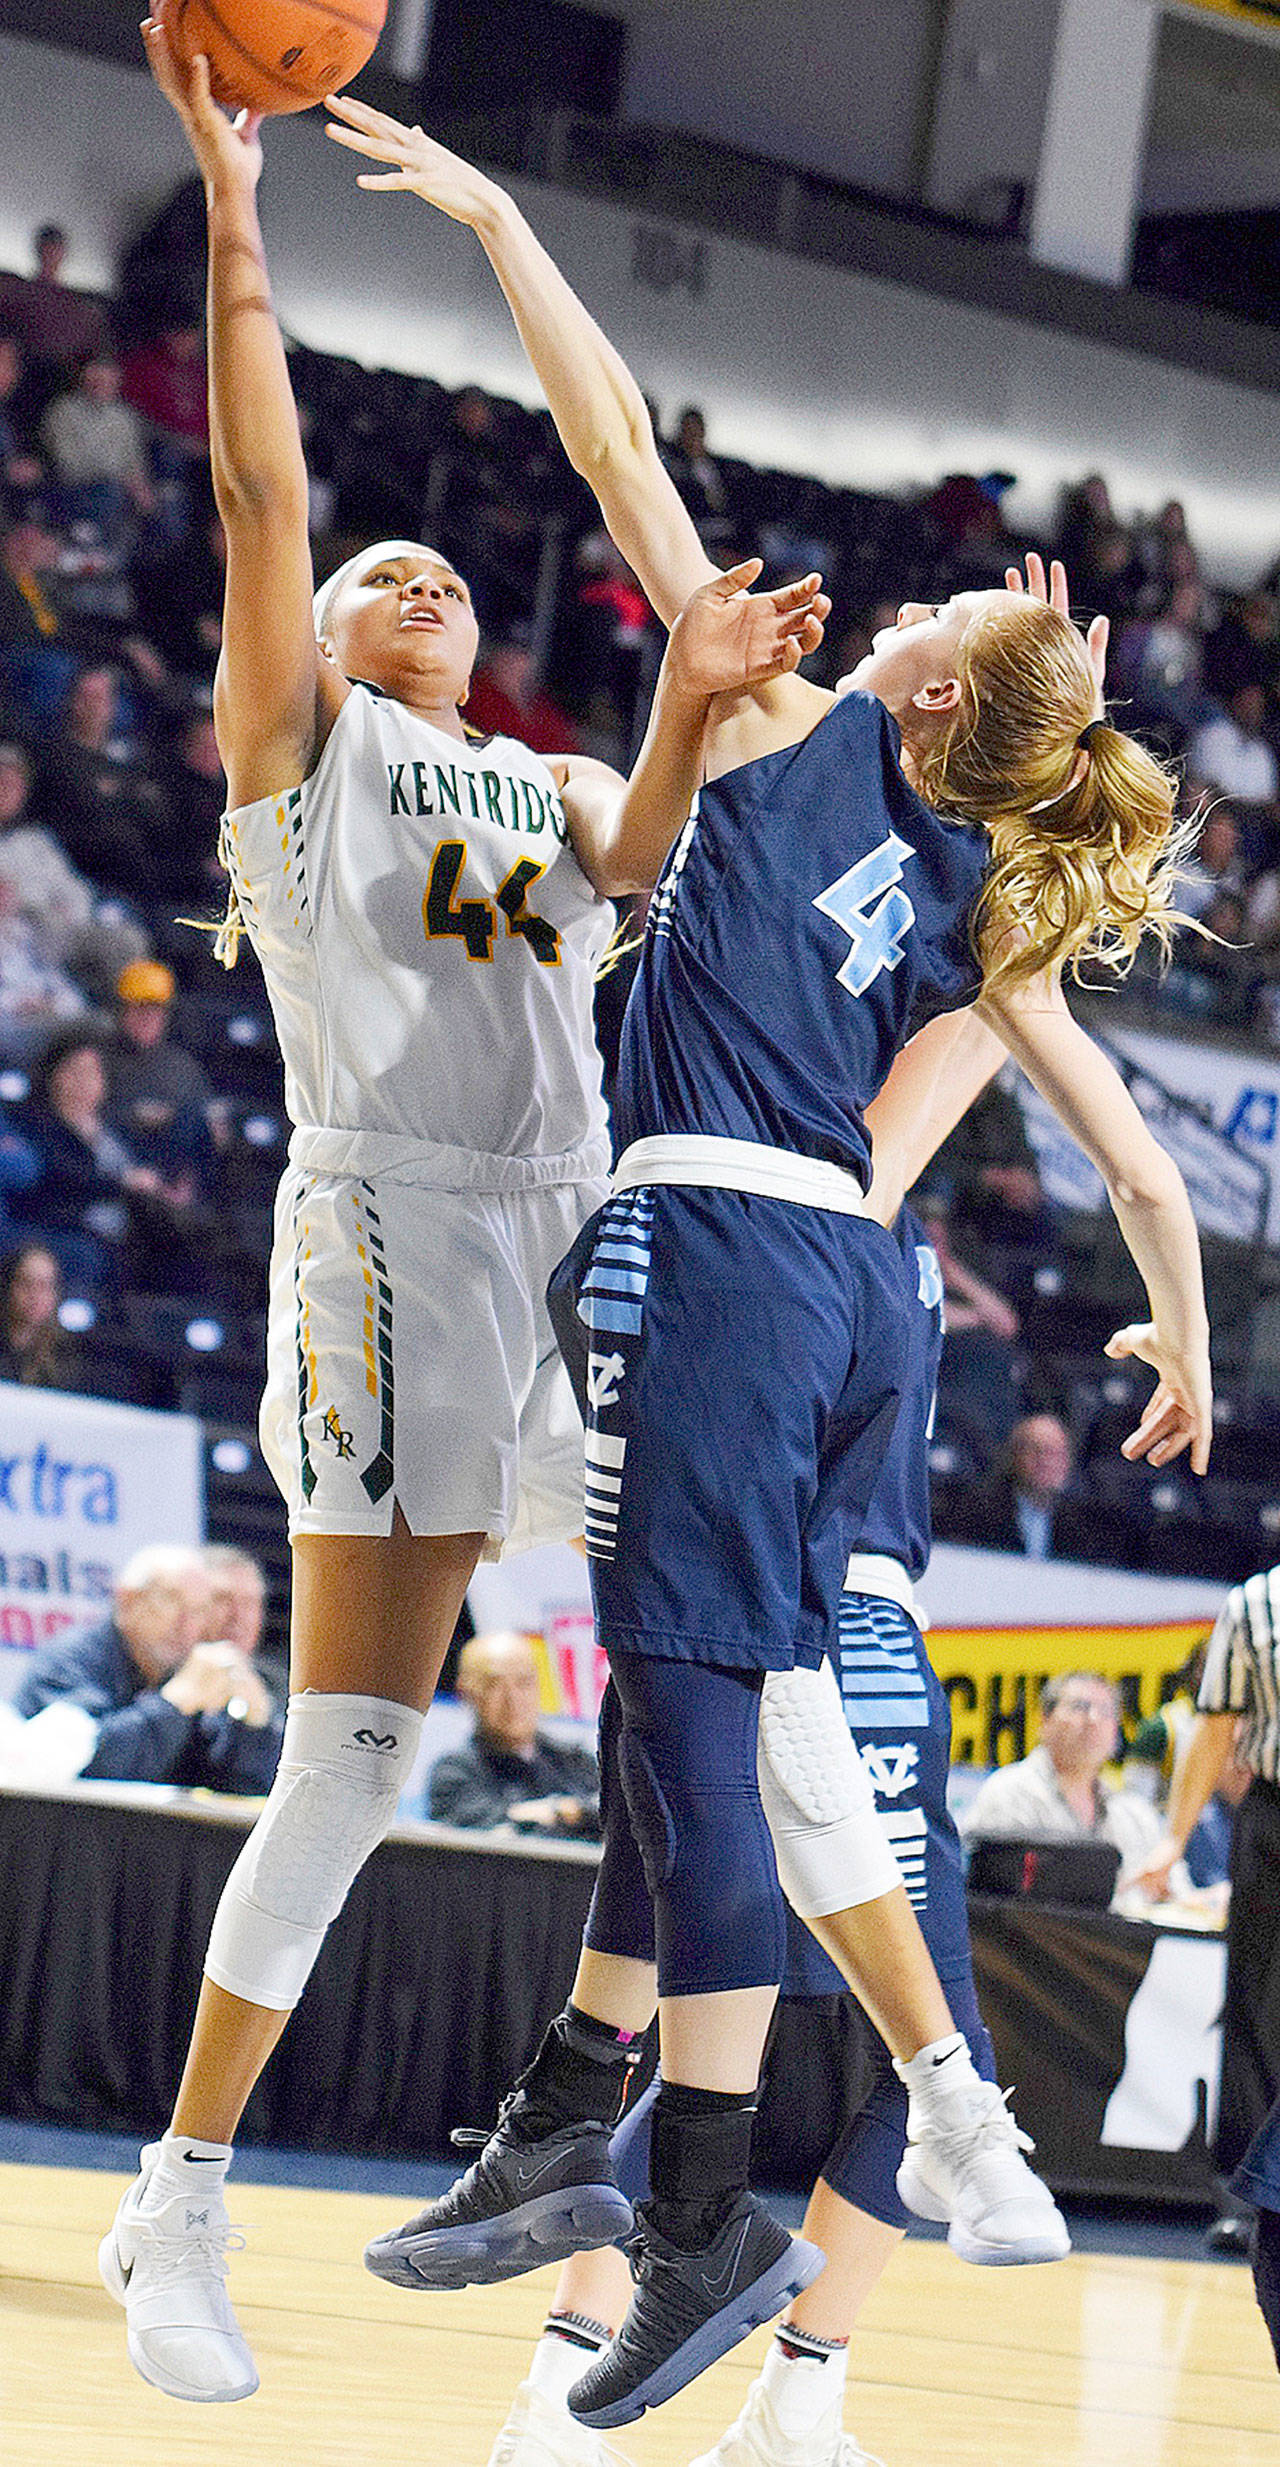 Kentridge High’s JaQuaya Miller goes for a shot in a game last season against Central Valley. FILE PHOTO, Rachel Ciampi